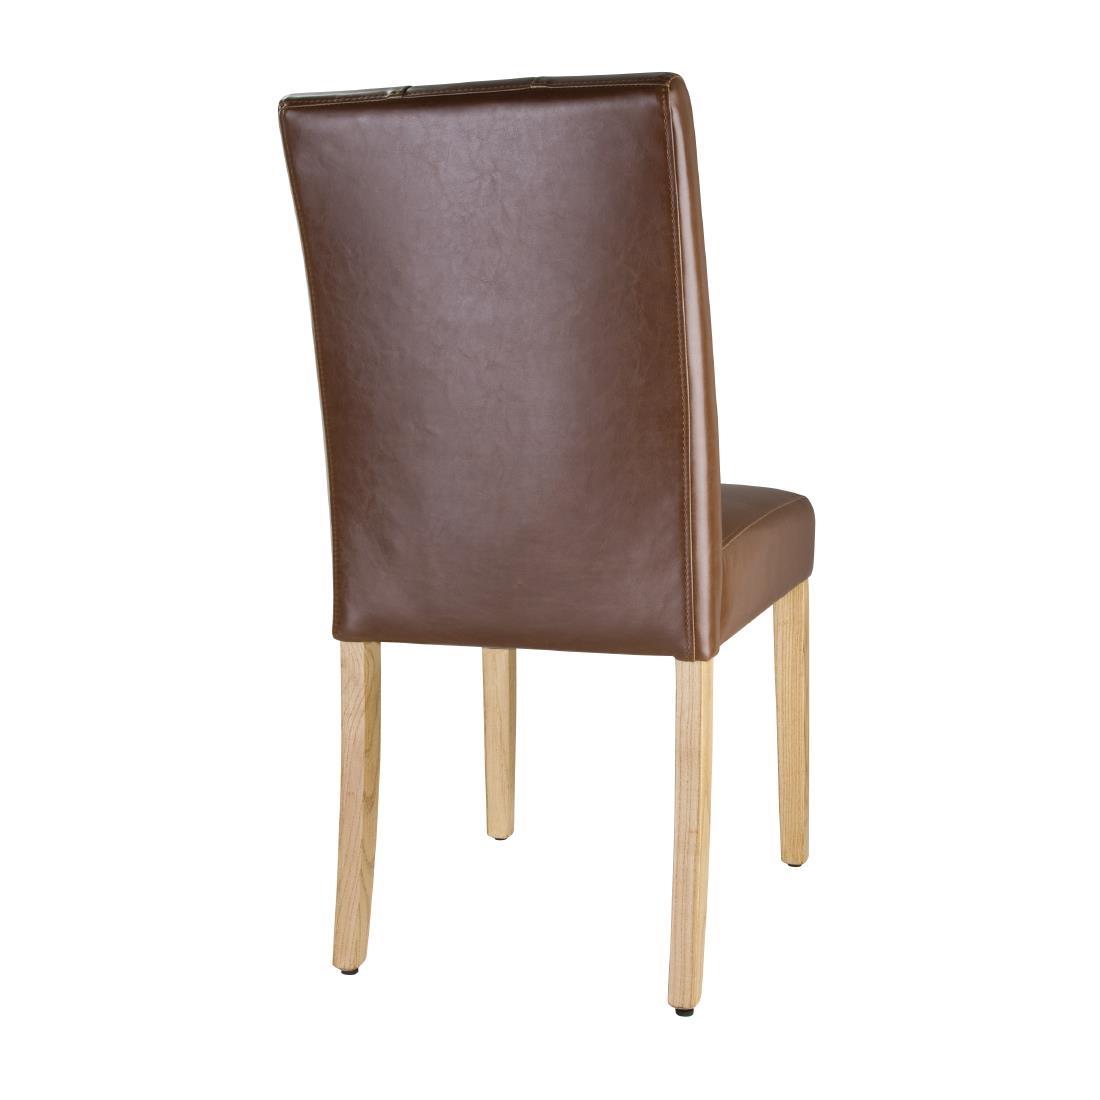 Bolero Chiswick Button Dining Chairs Tan Leather (Pack of 2) - DT699  - 3